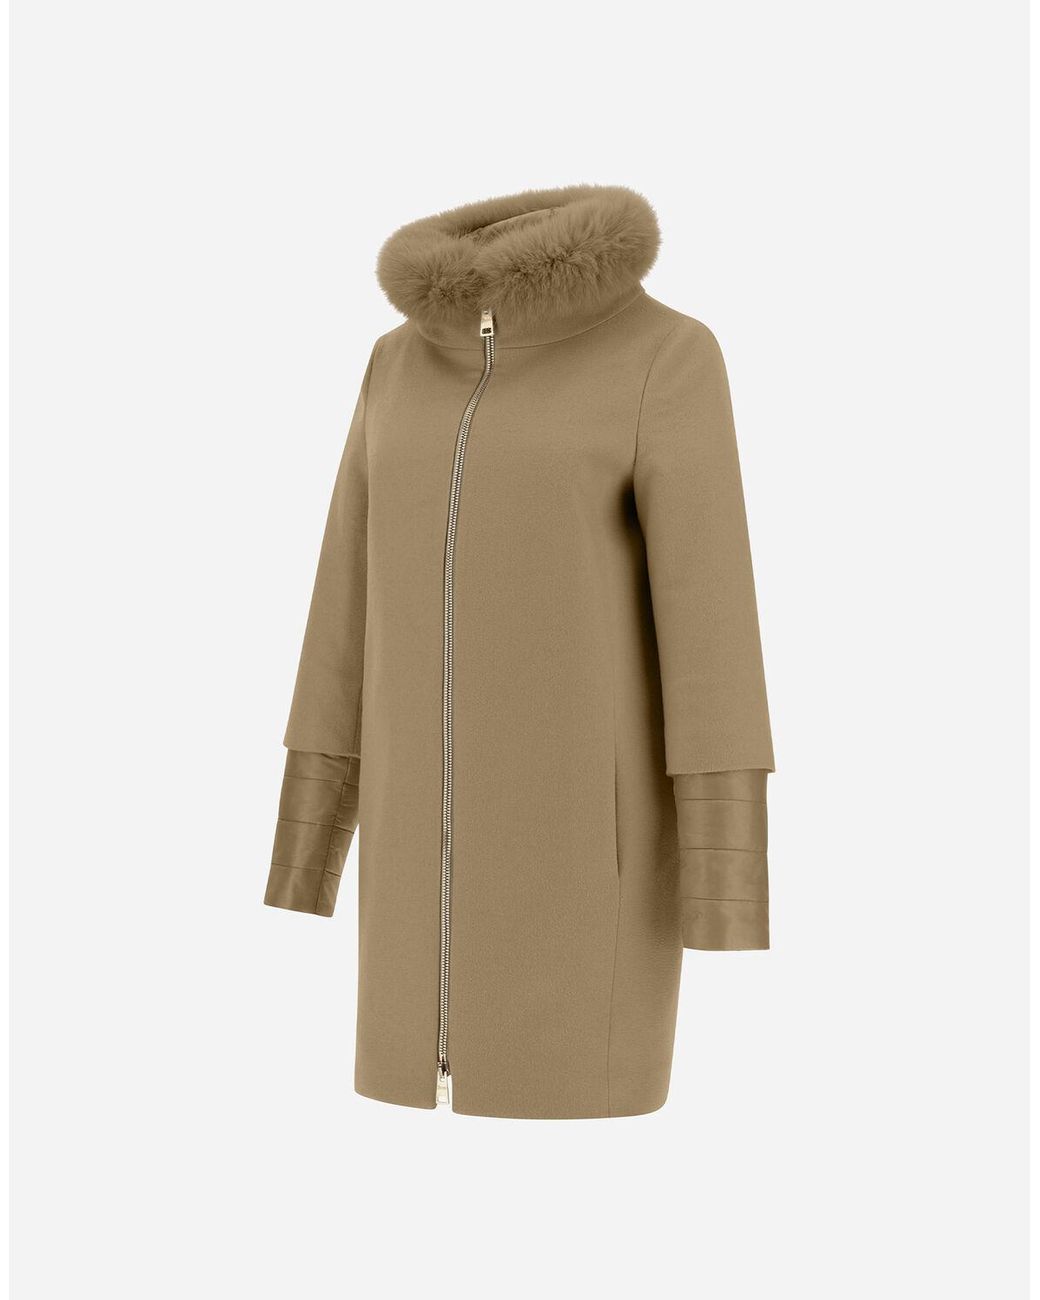 Herno Cashmere Coat in Natural | Lyst